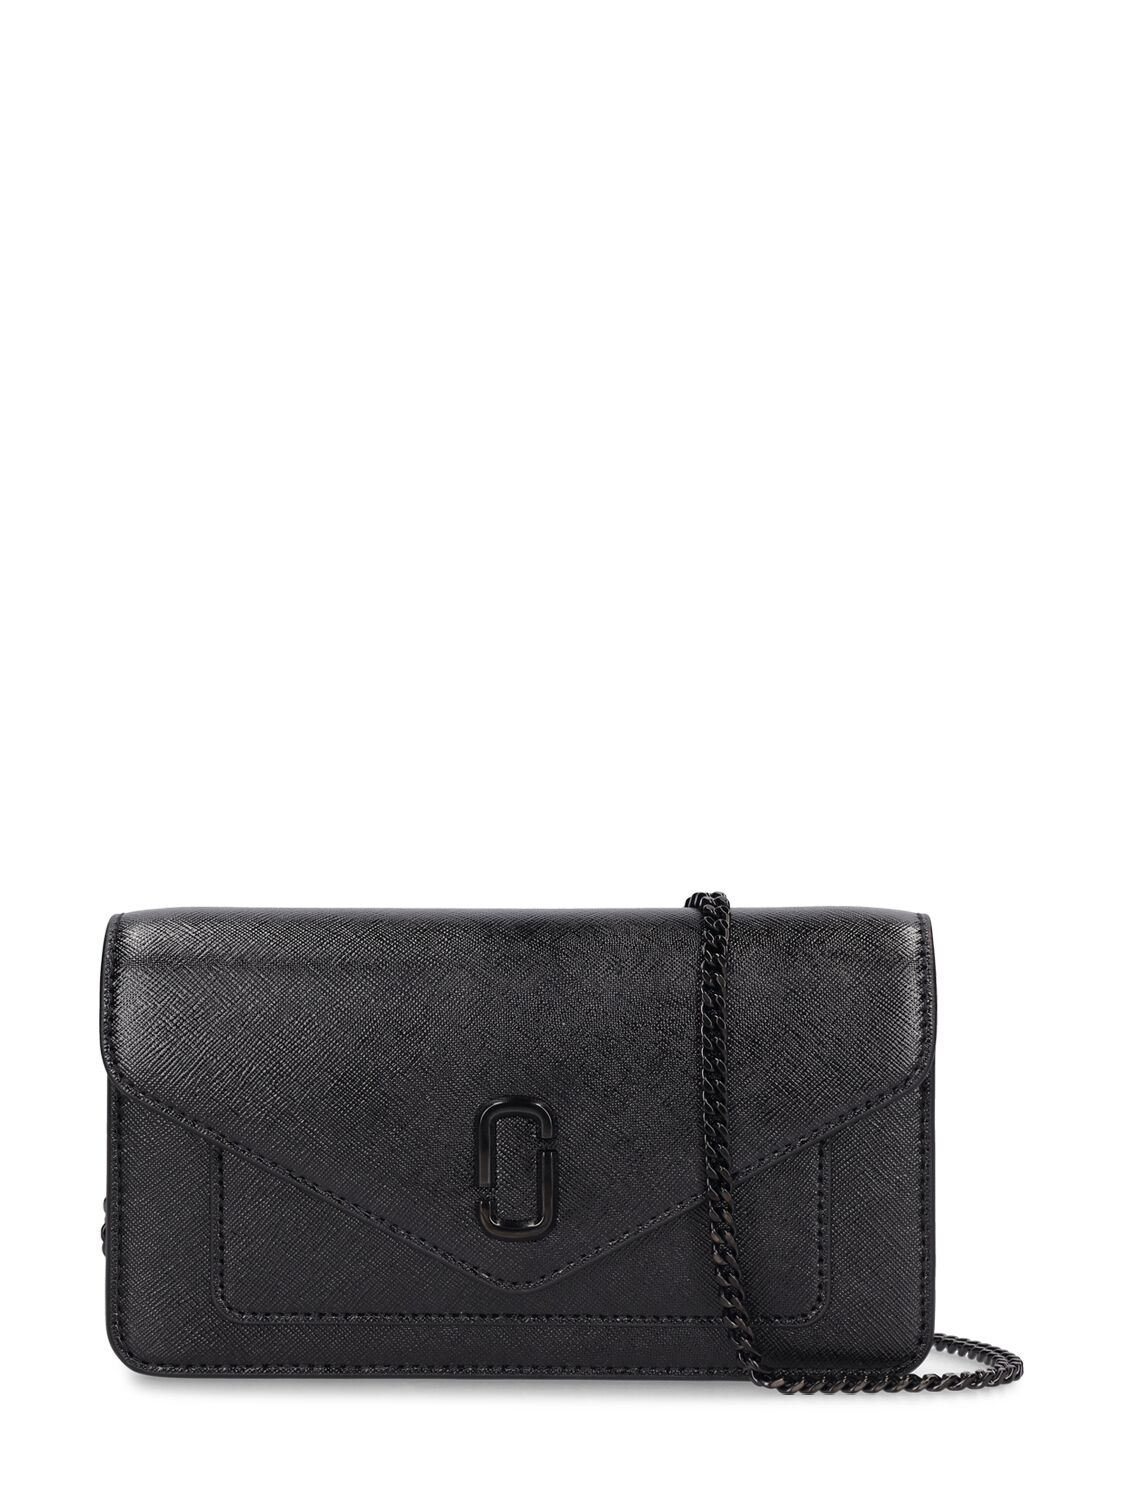 The Leather Envelope Chain Wallet